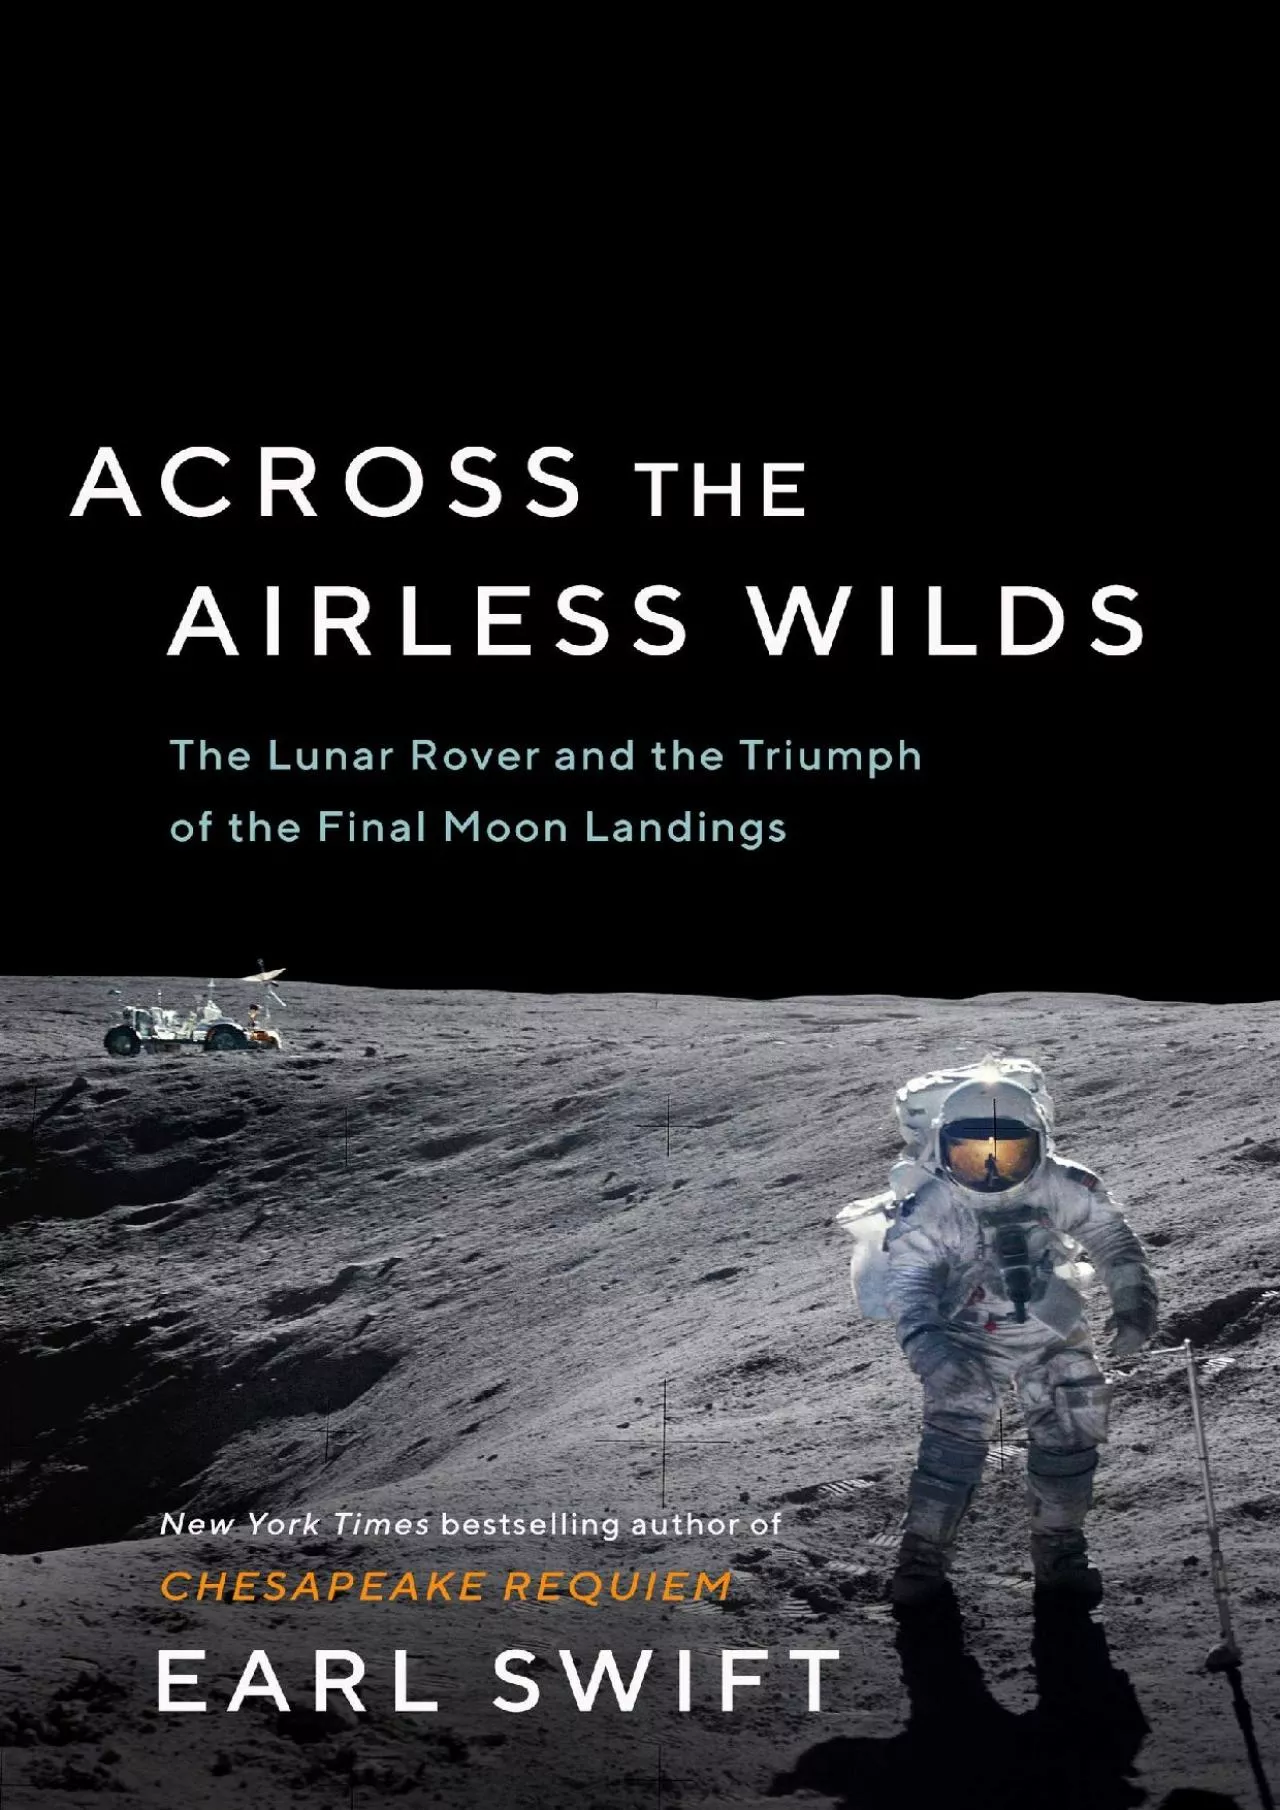 [DOWNLOAD]-Across the Airless Wilds: The Lunar Rover and the Triumph of the Final Moon